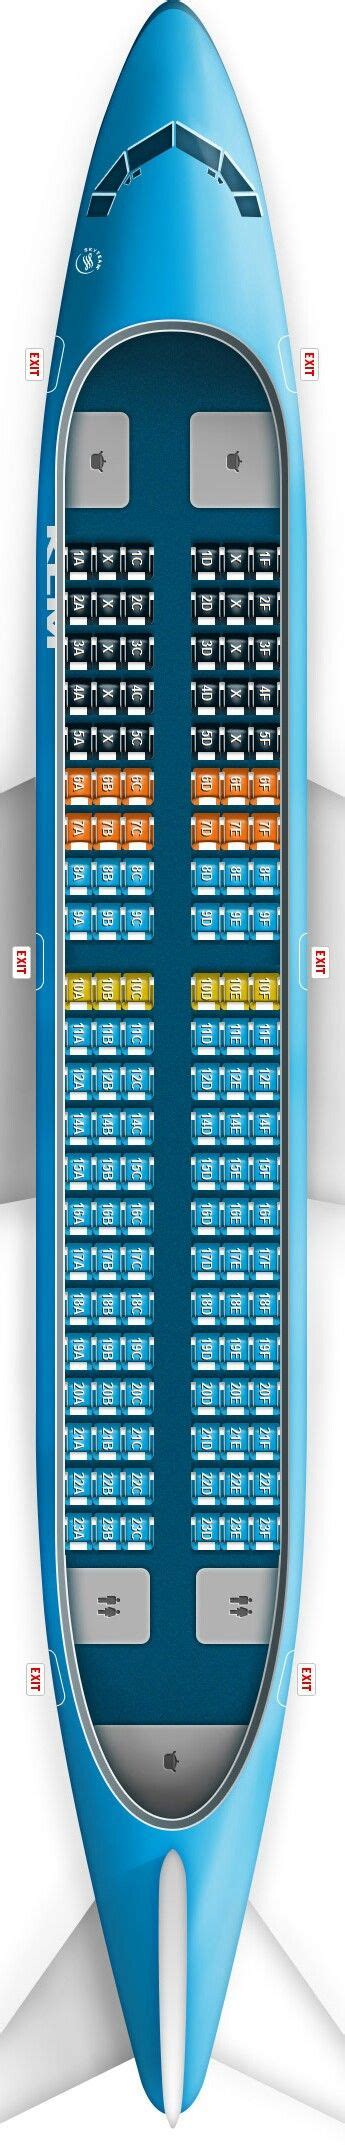 Klm 737 700 Seat Map Klm Airlines Airline Seats Klm Royal Dutch